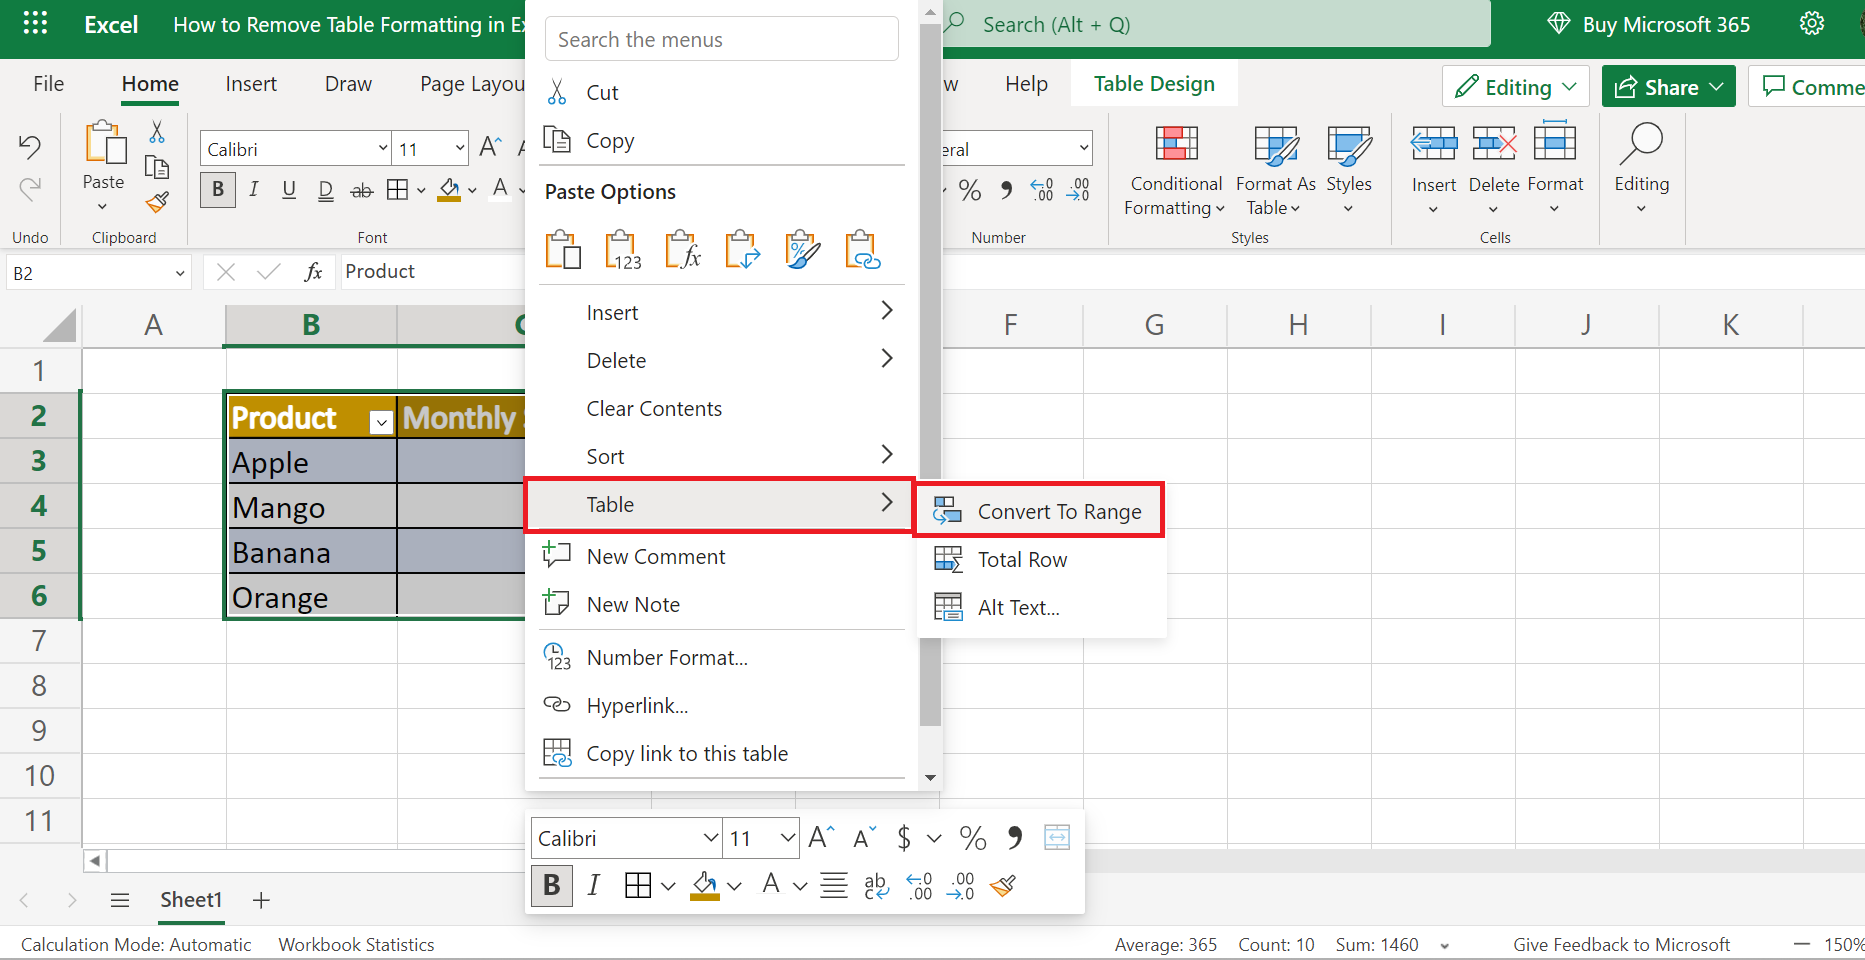  Remove Table Formatting in Excel 